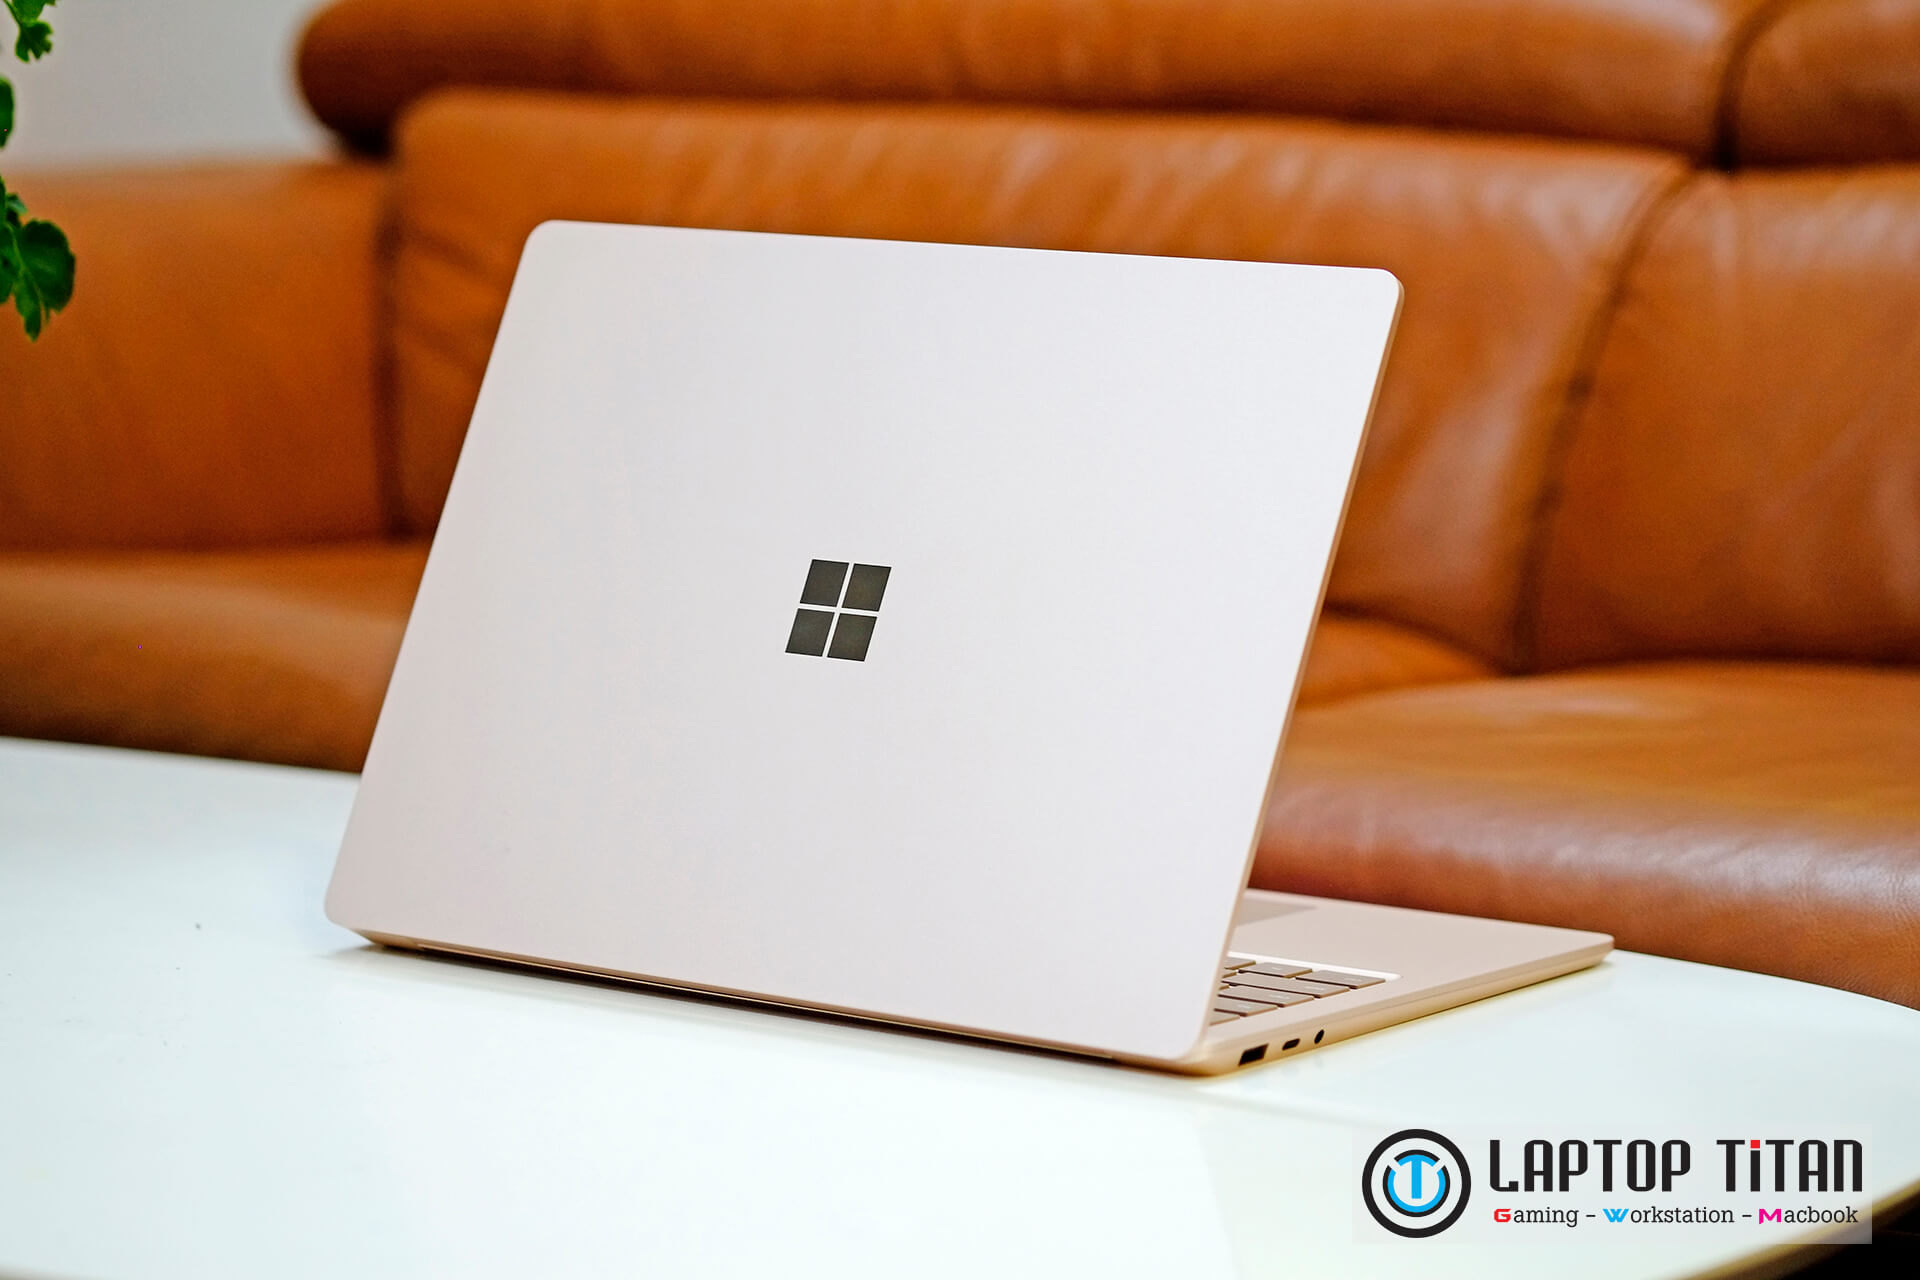 Surface Laptop 3 Core I5 1035G7 / 8Gb / 256Gb / 13.5″ 2K Touch / Gold